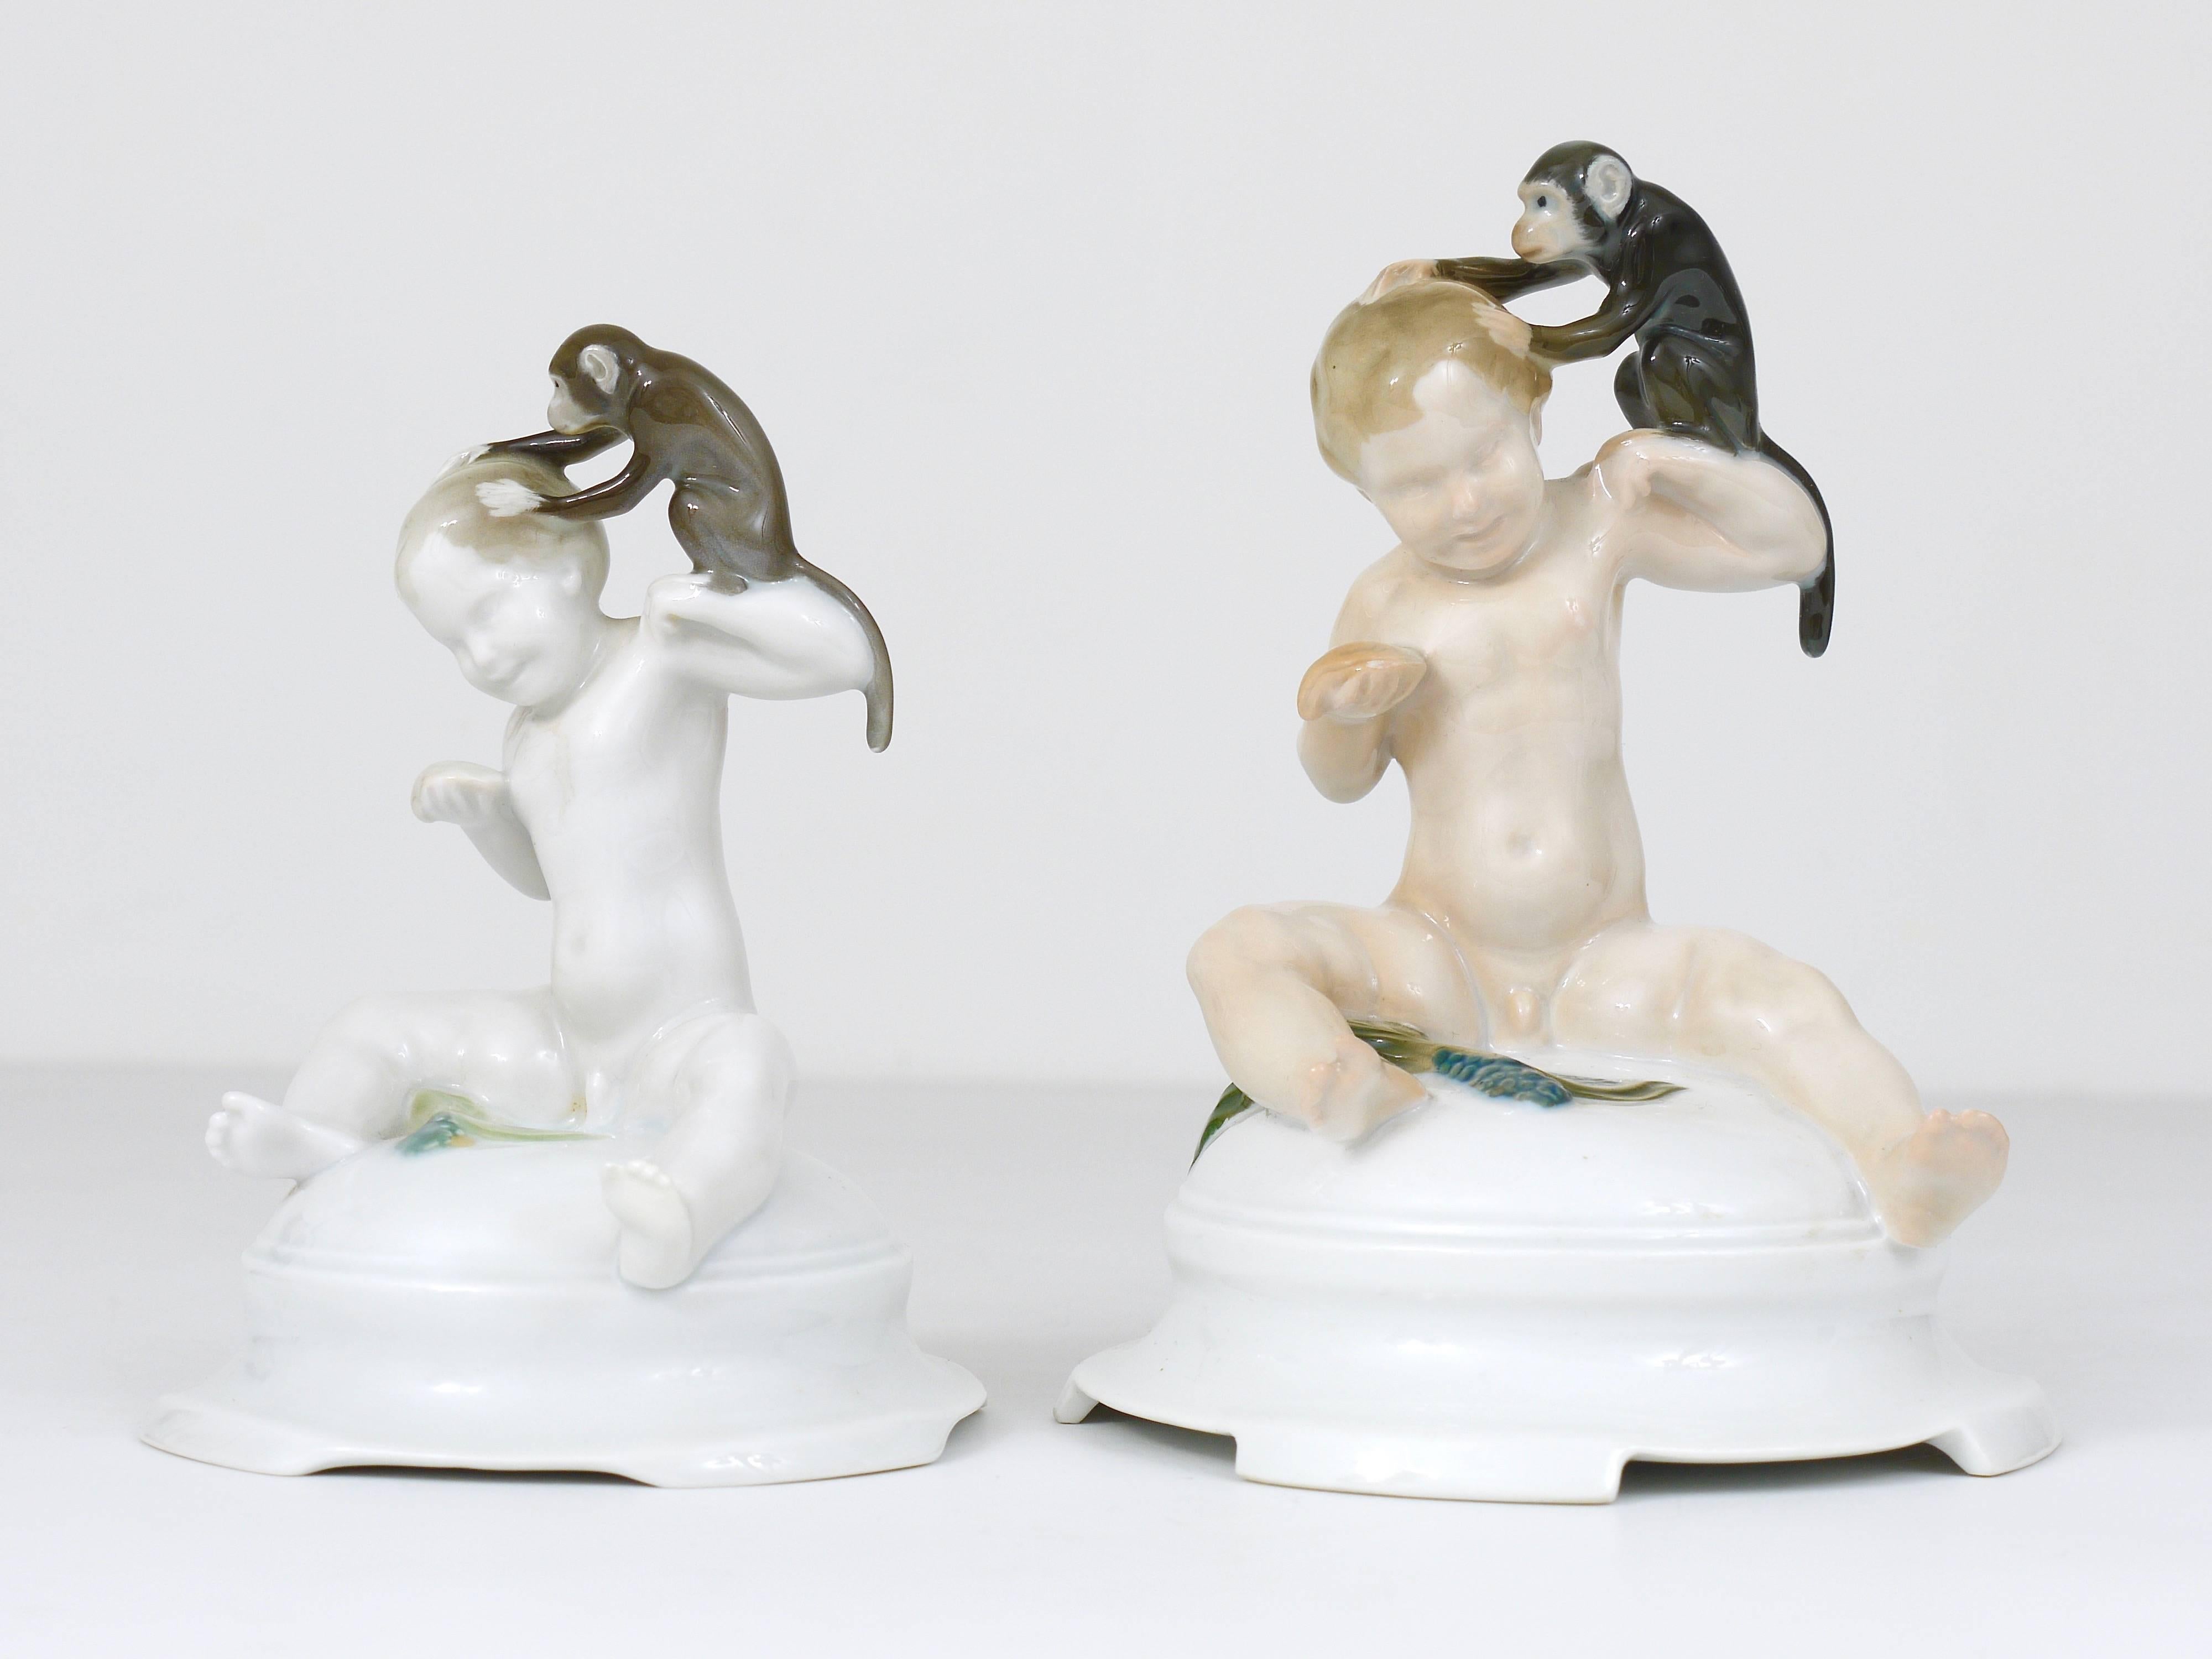 An unusual porcelain figurine displaying a putto being deloused by a monkey. This figurine was created by the German designer Ferdinand Liebermann in 1910 and manufactured Rosenthal Germany, Kunstabteilung Selb. In excellent condition. We are